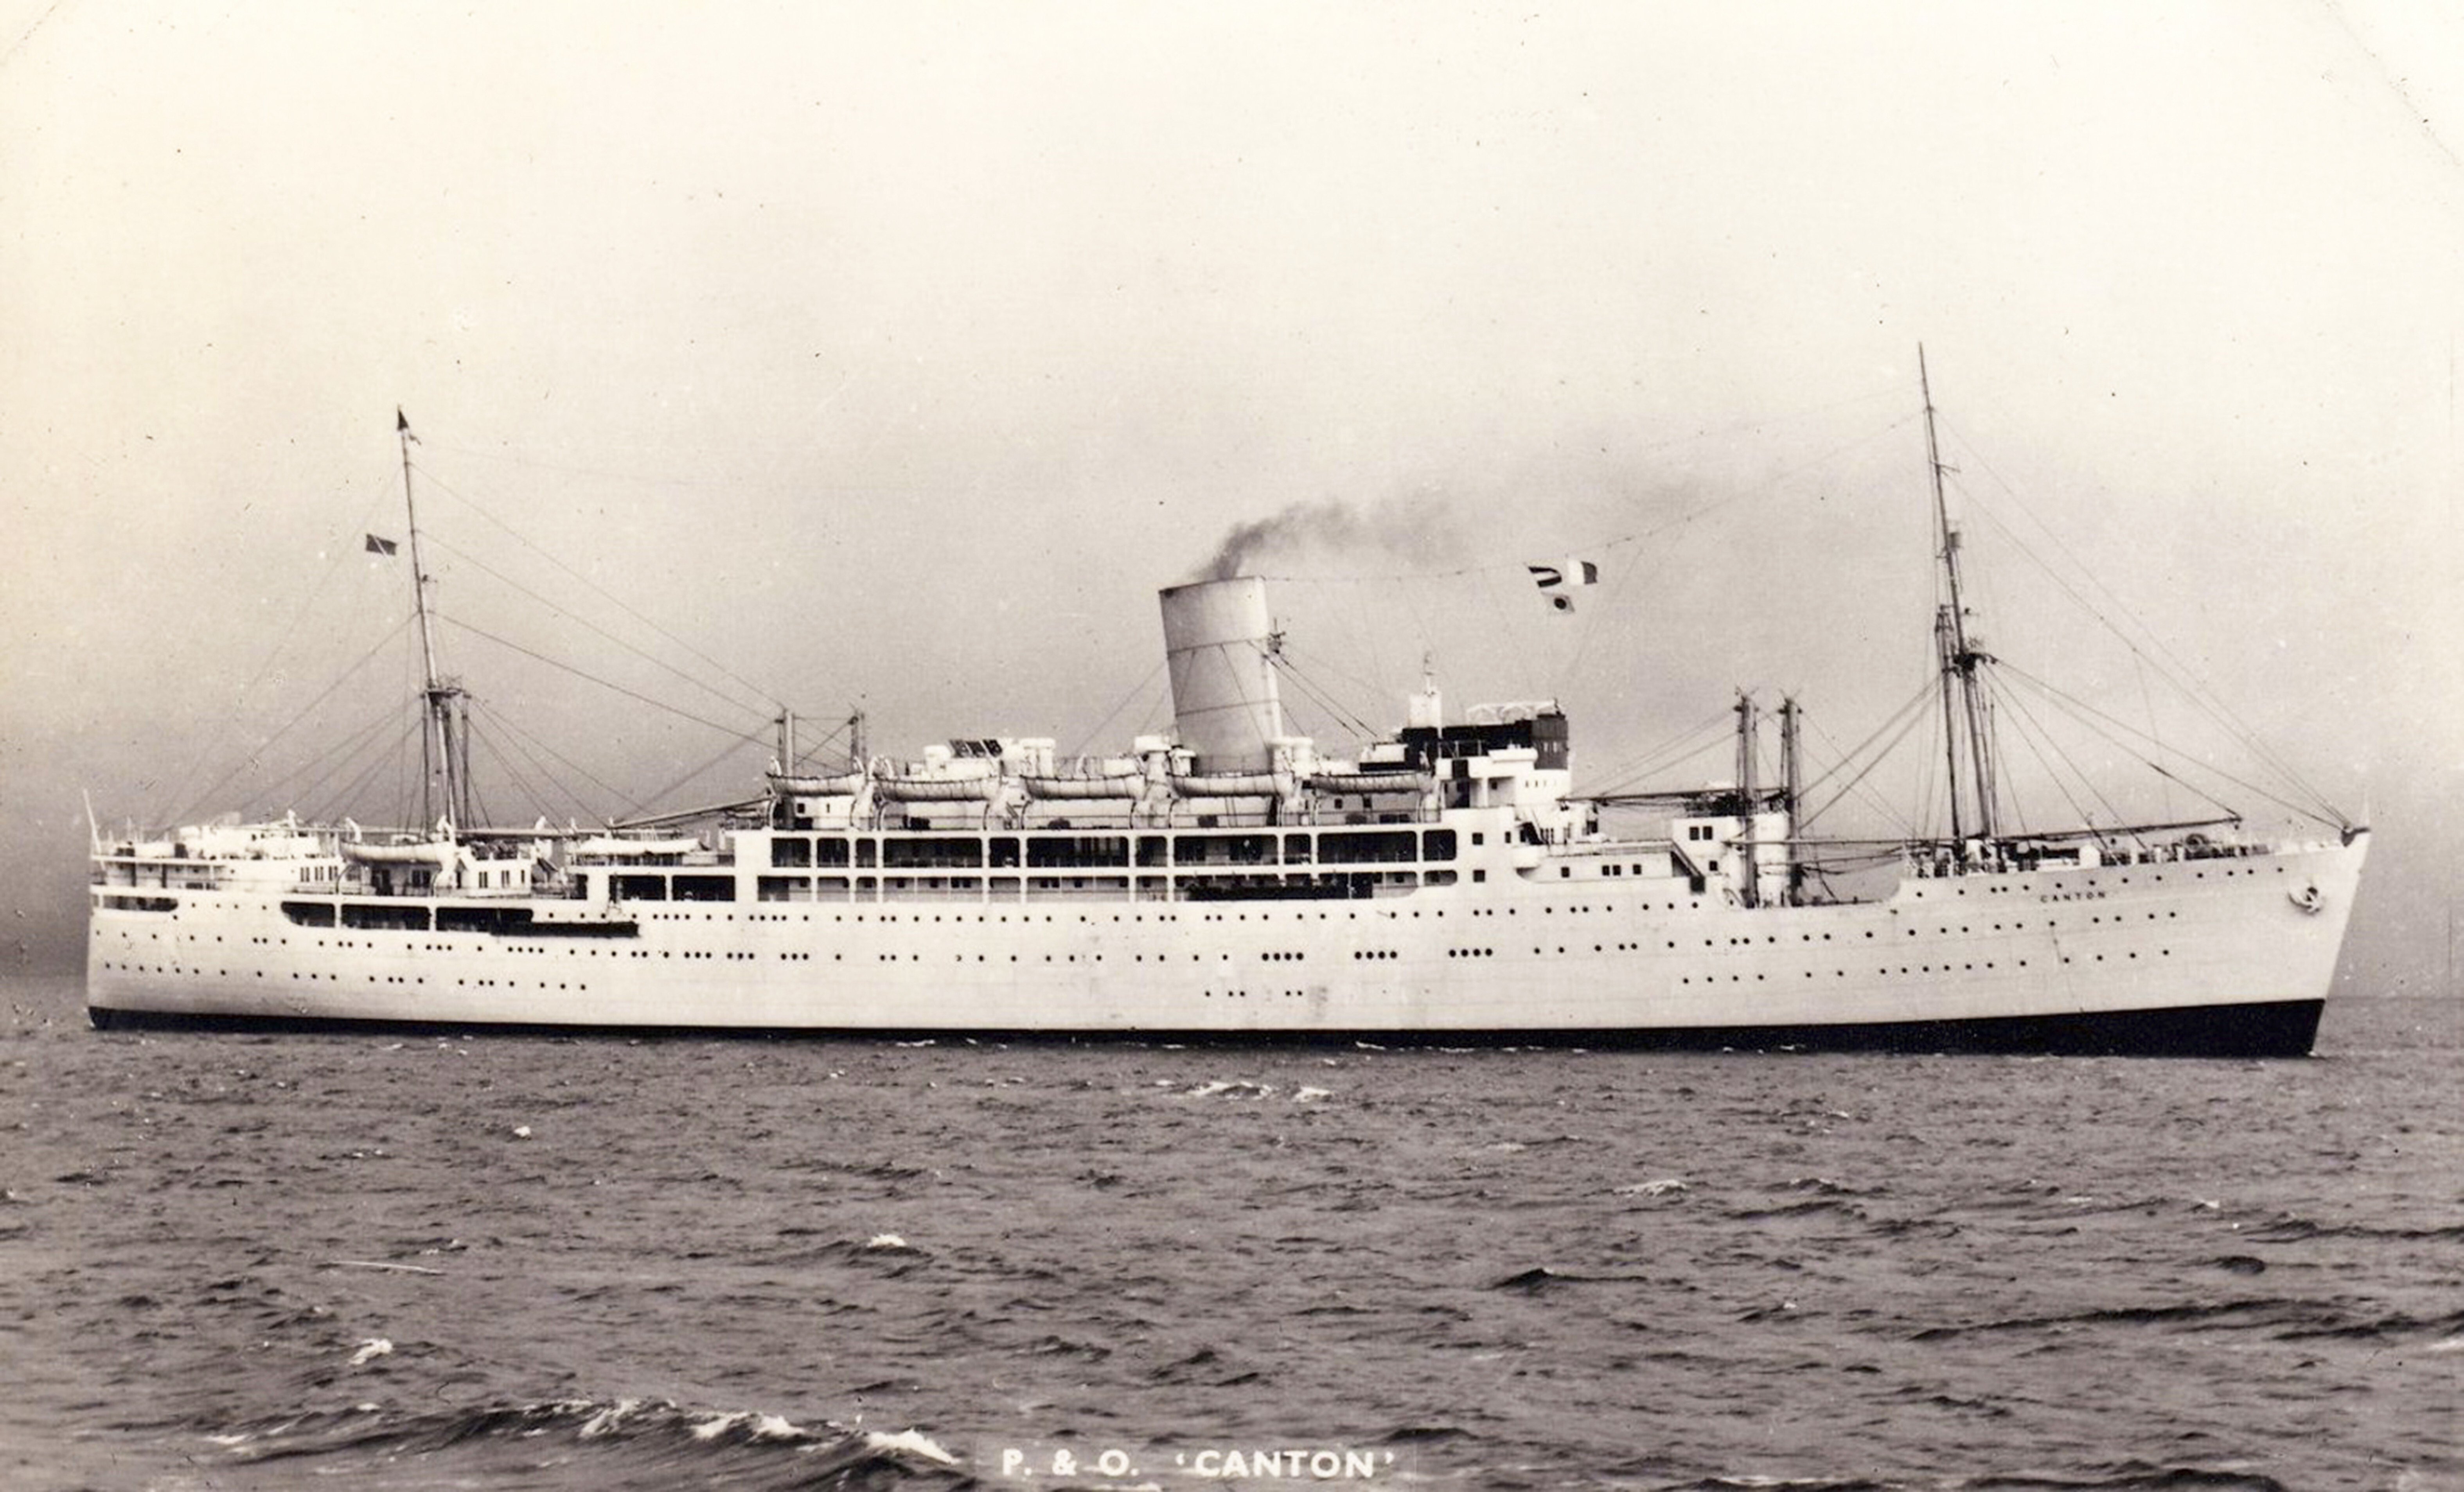 The RMS Canton liner in 1947.